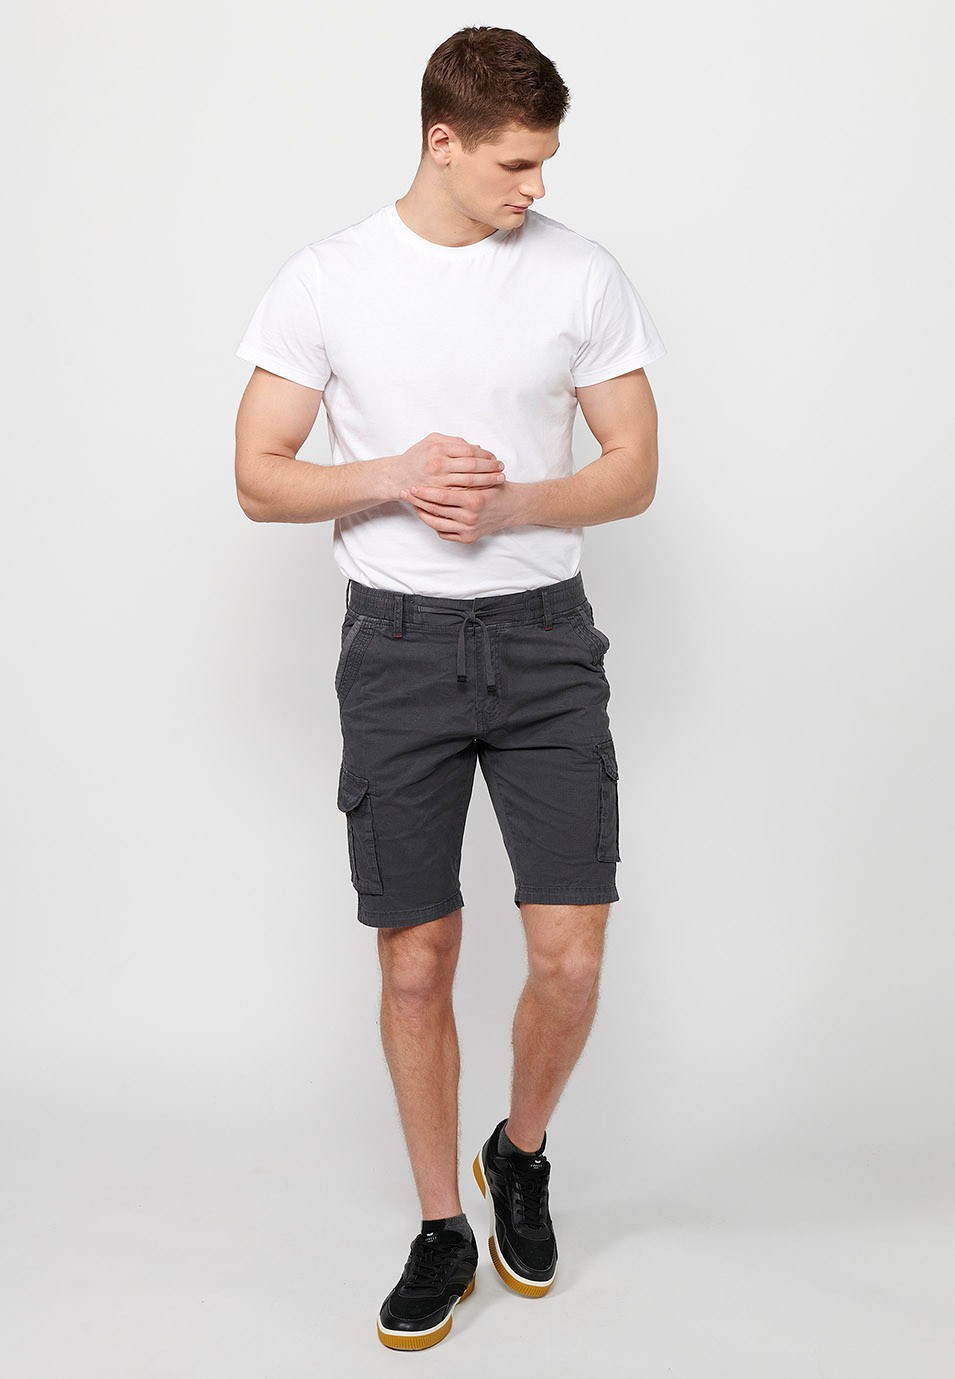 Cargo shorts with front closure with zipper and button and four pockets, two rear pockets with flap with two cargo pockets with flap and adjustable waist with drawstring in Gray for Men